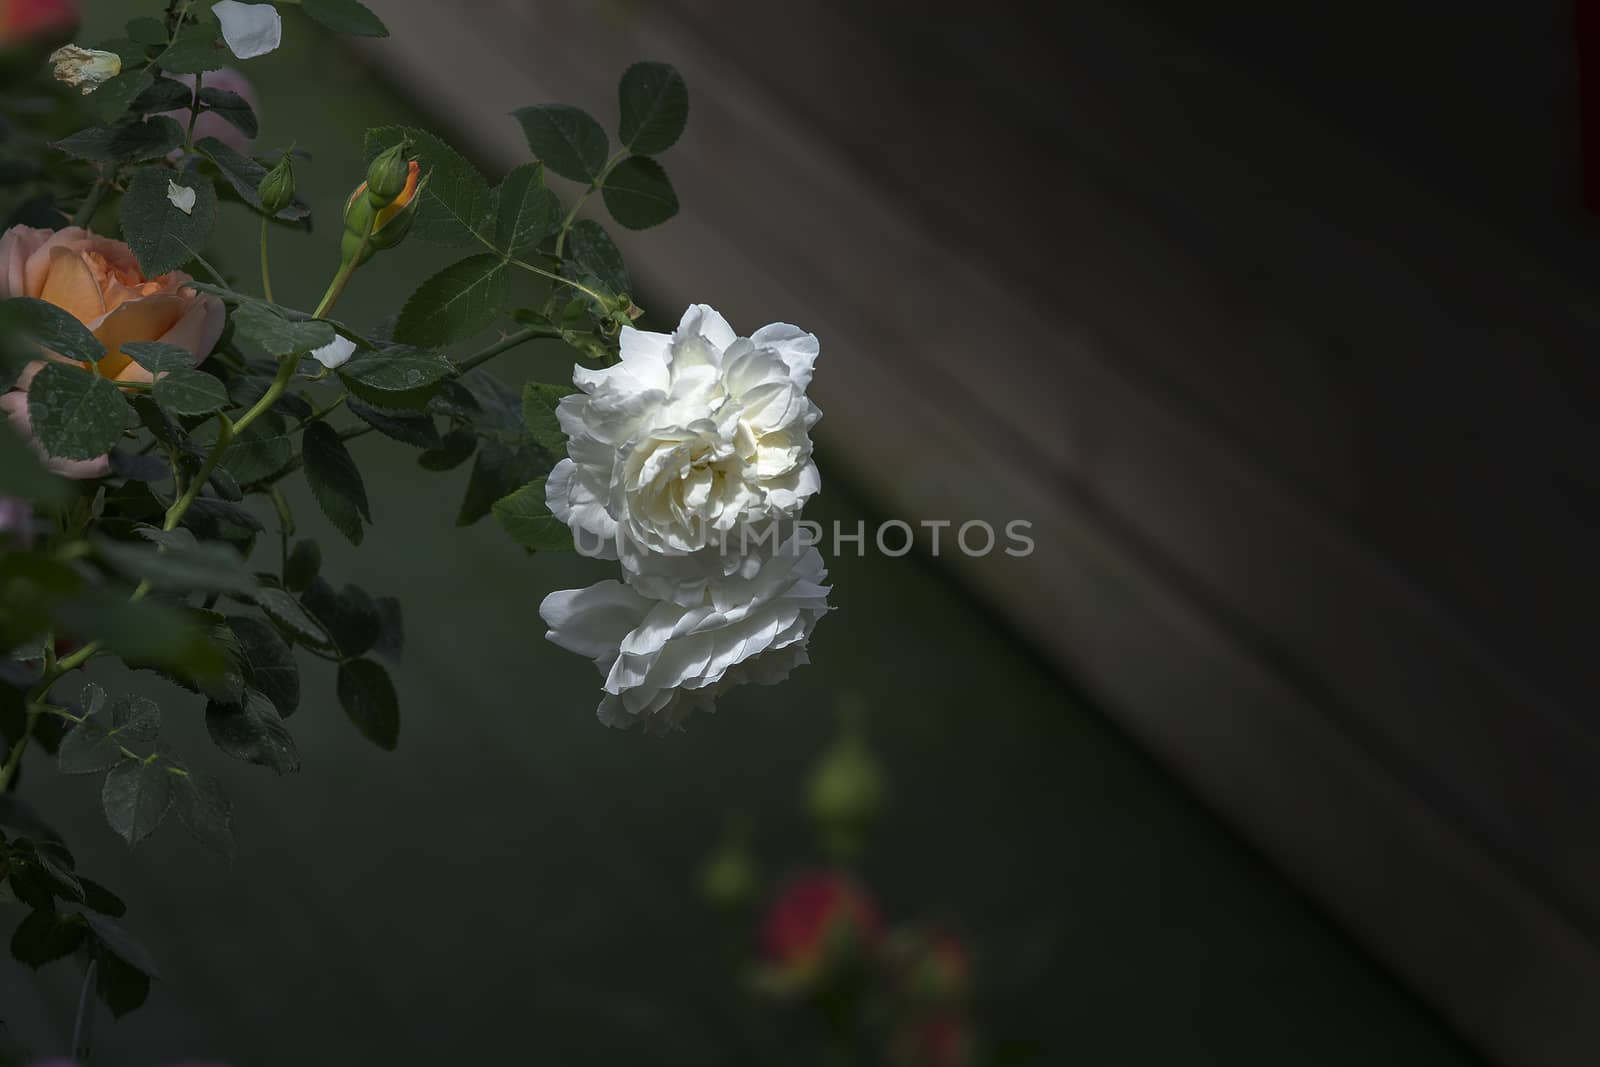 Beautiful double white rose flowers closeup by ArtesiaWells